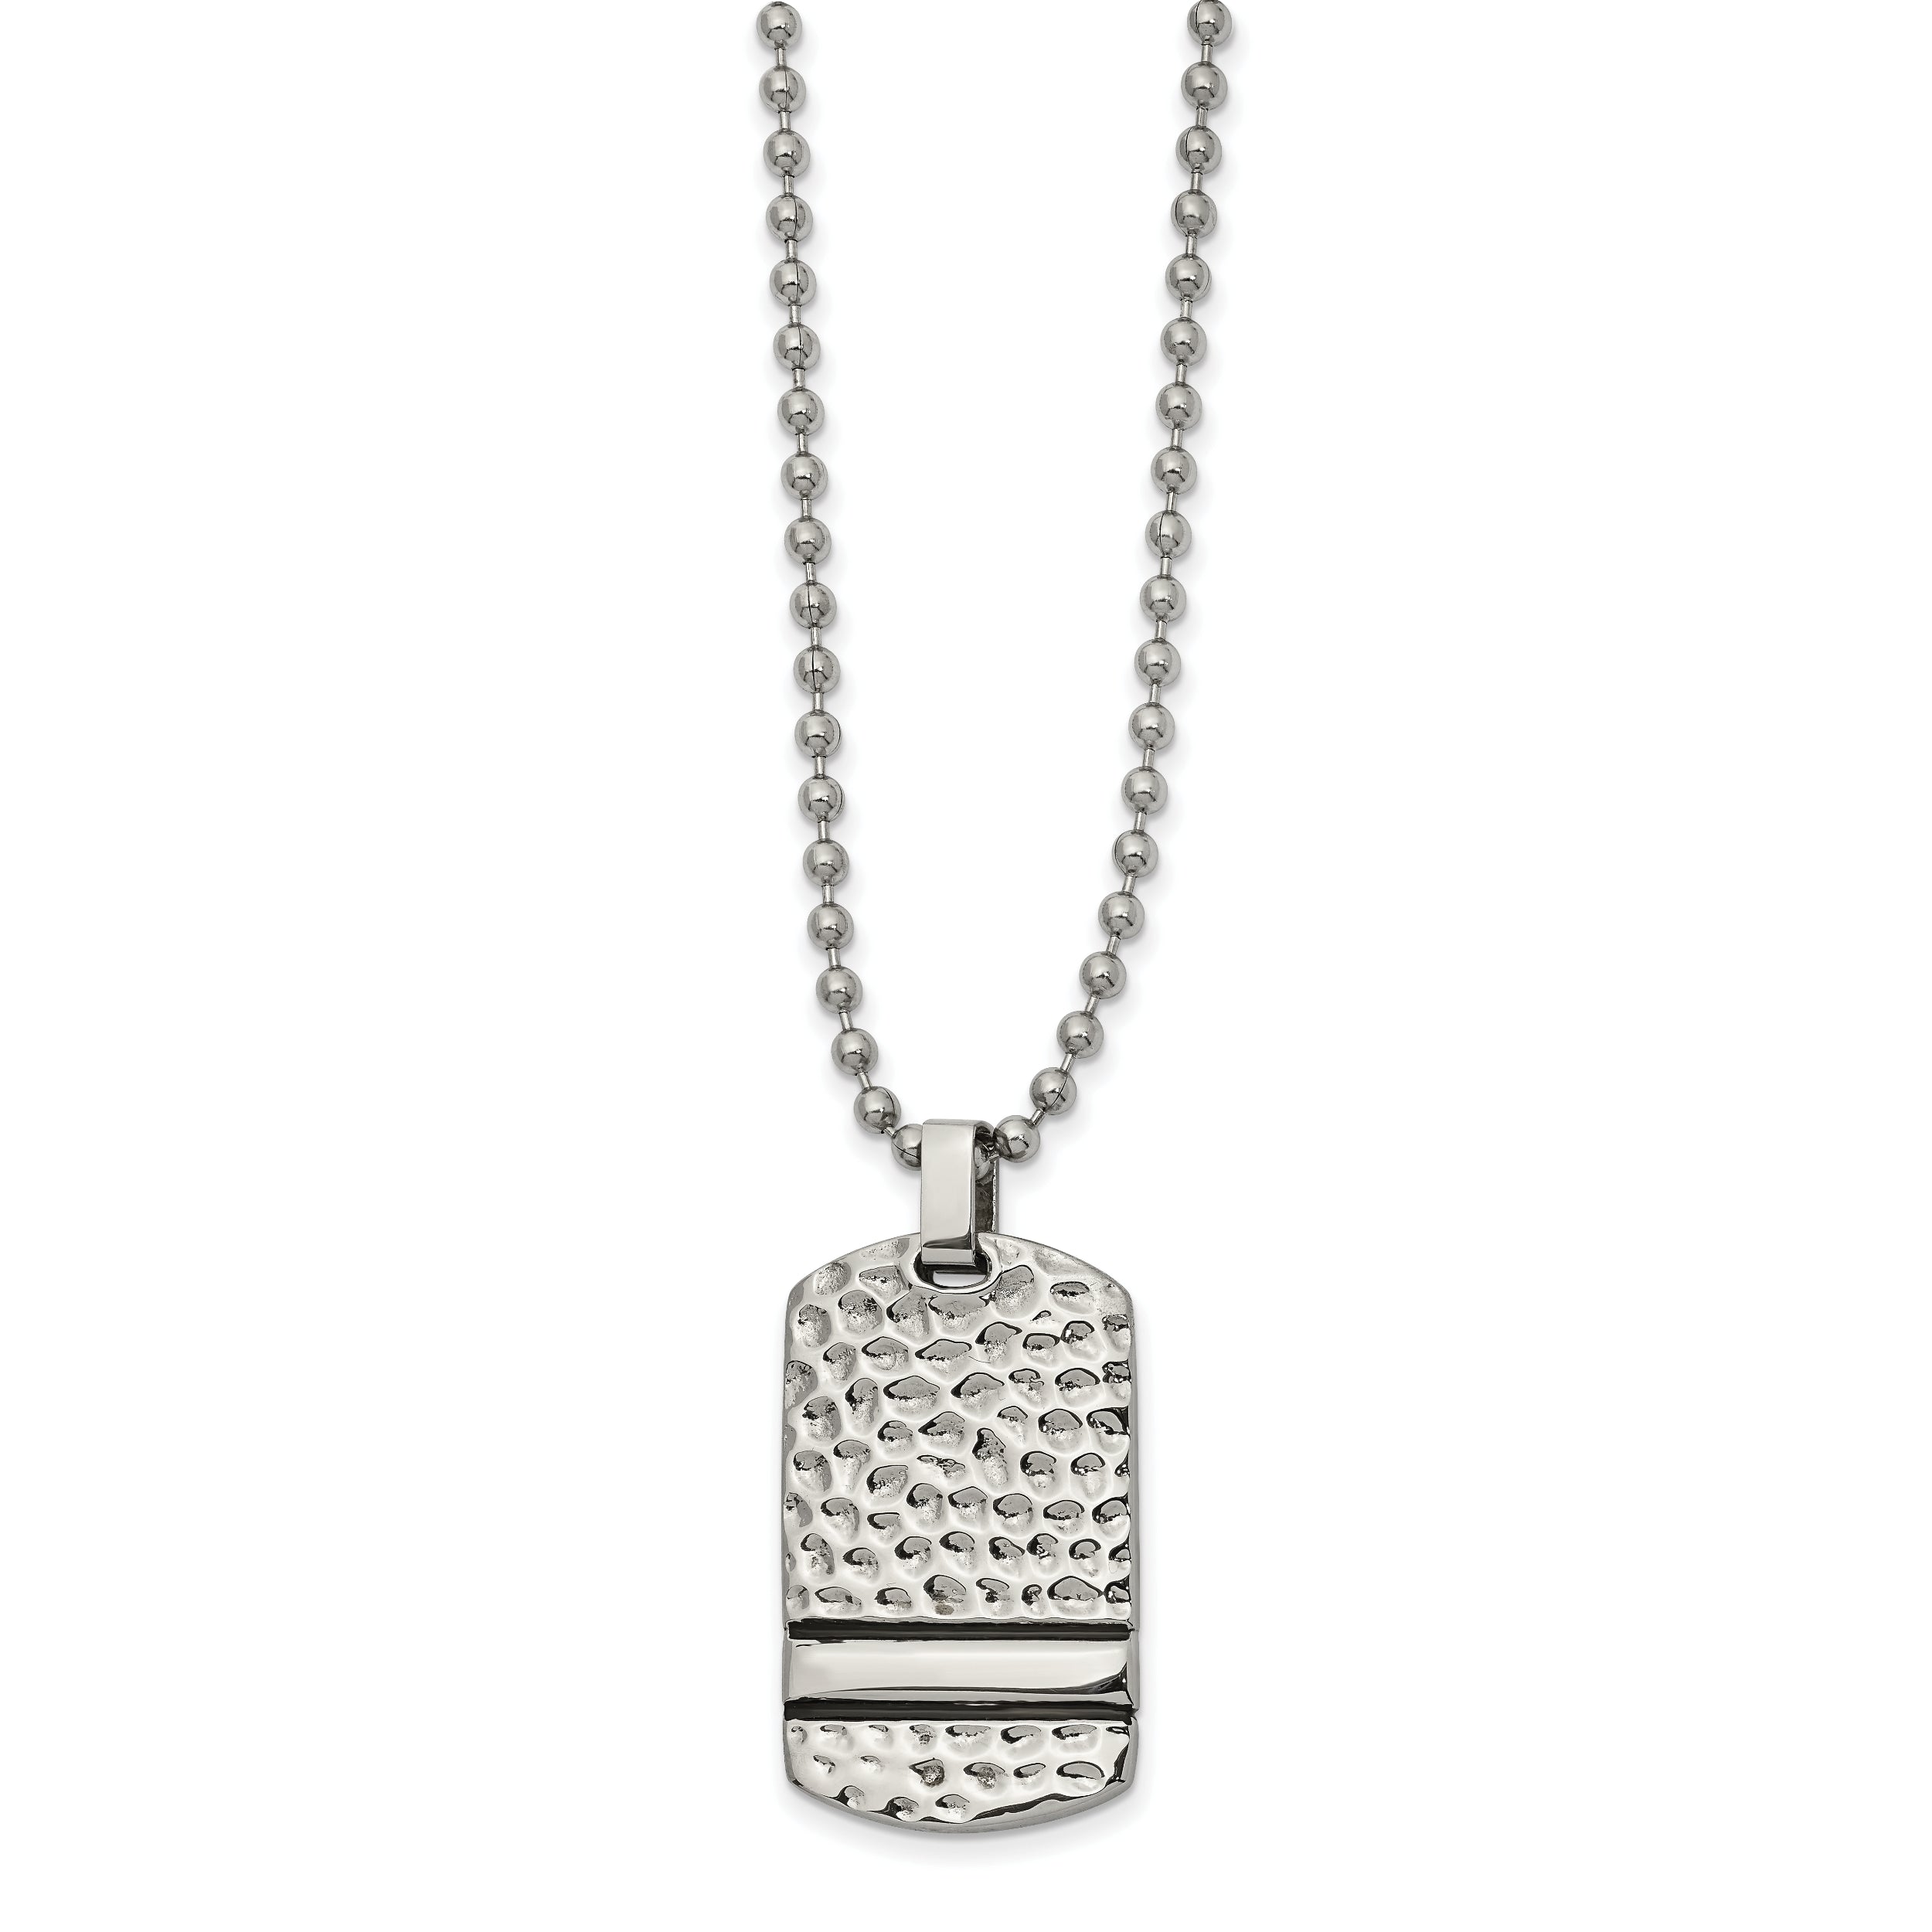 Chisel Stainless Steel Antiqued and Polished Hammered Reversible Dog Tag on a 22 inch Ball Chain Necklace